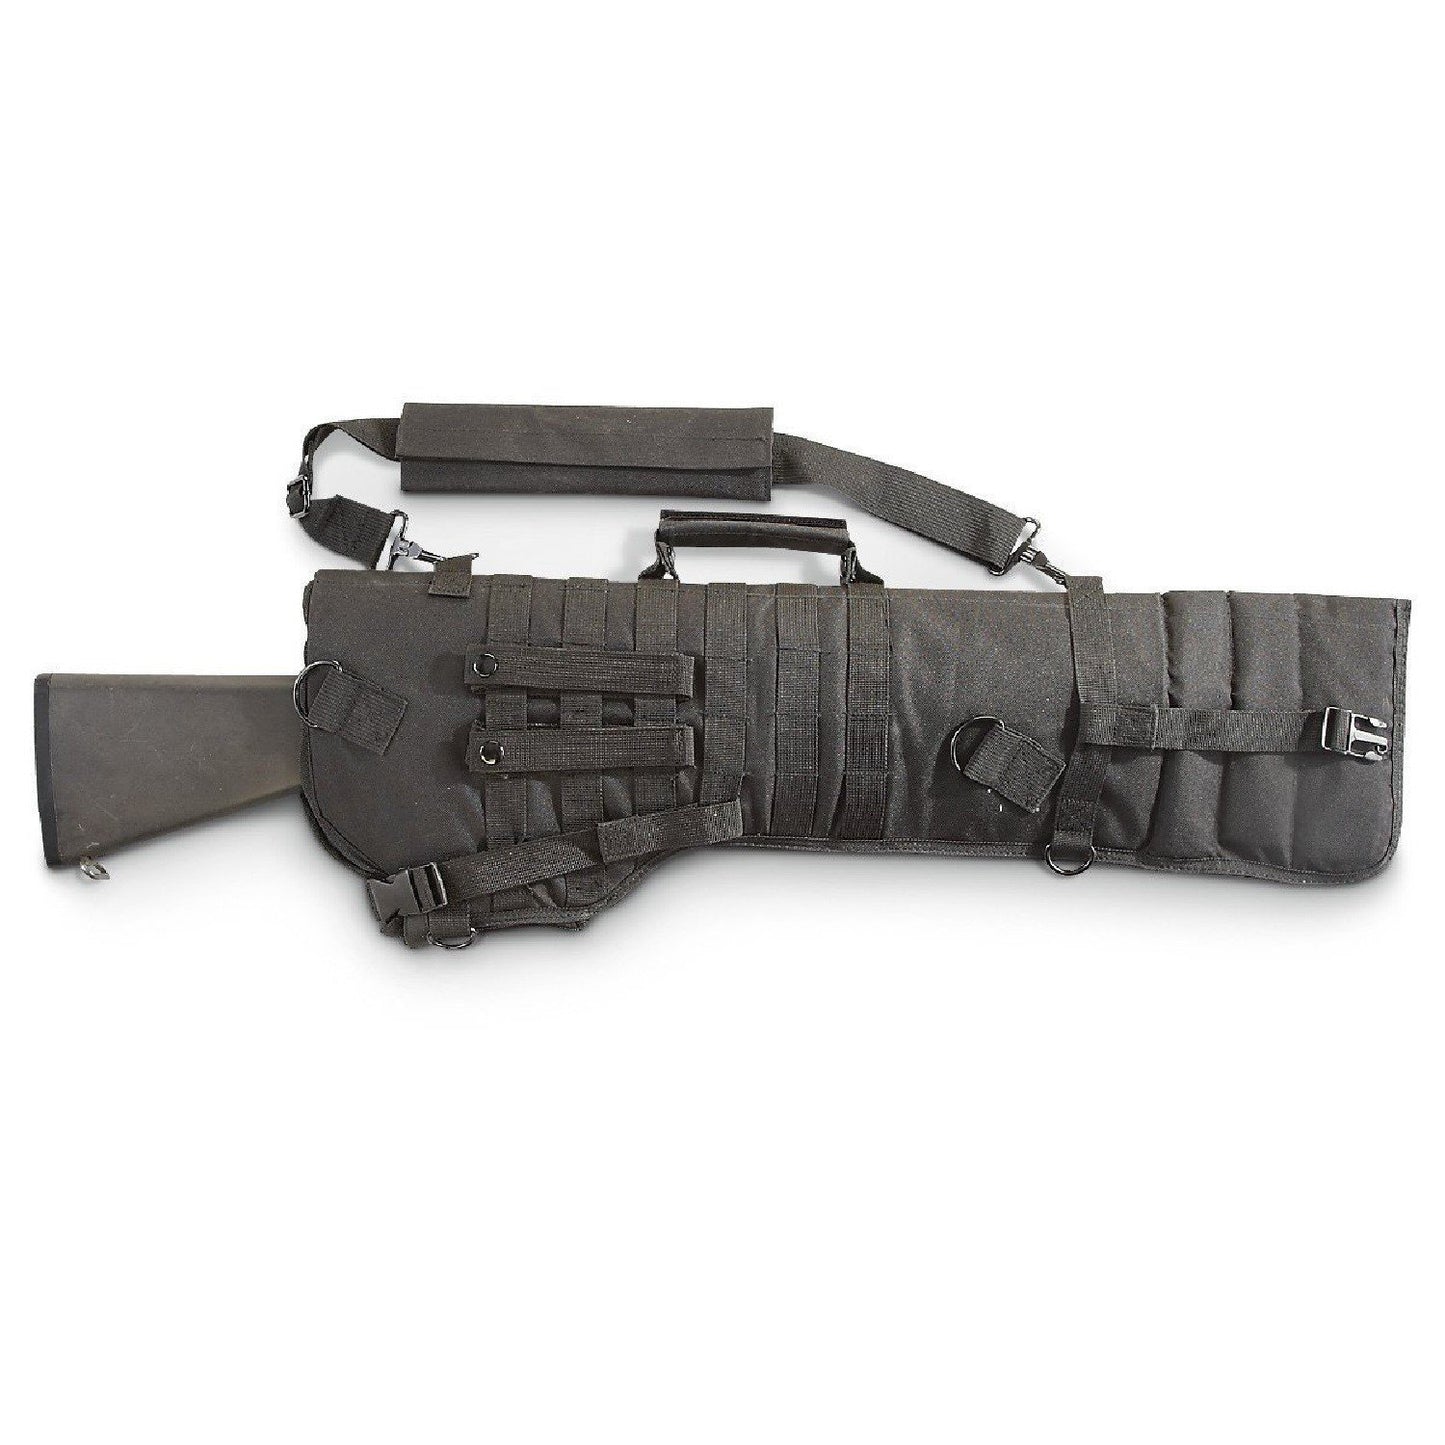 VISM by NcStar Tactical Rifle Scabbard - Black - NC Star